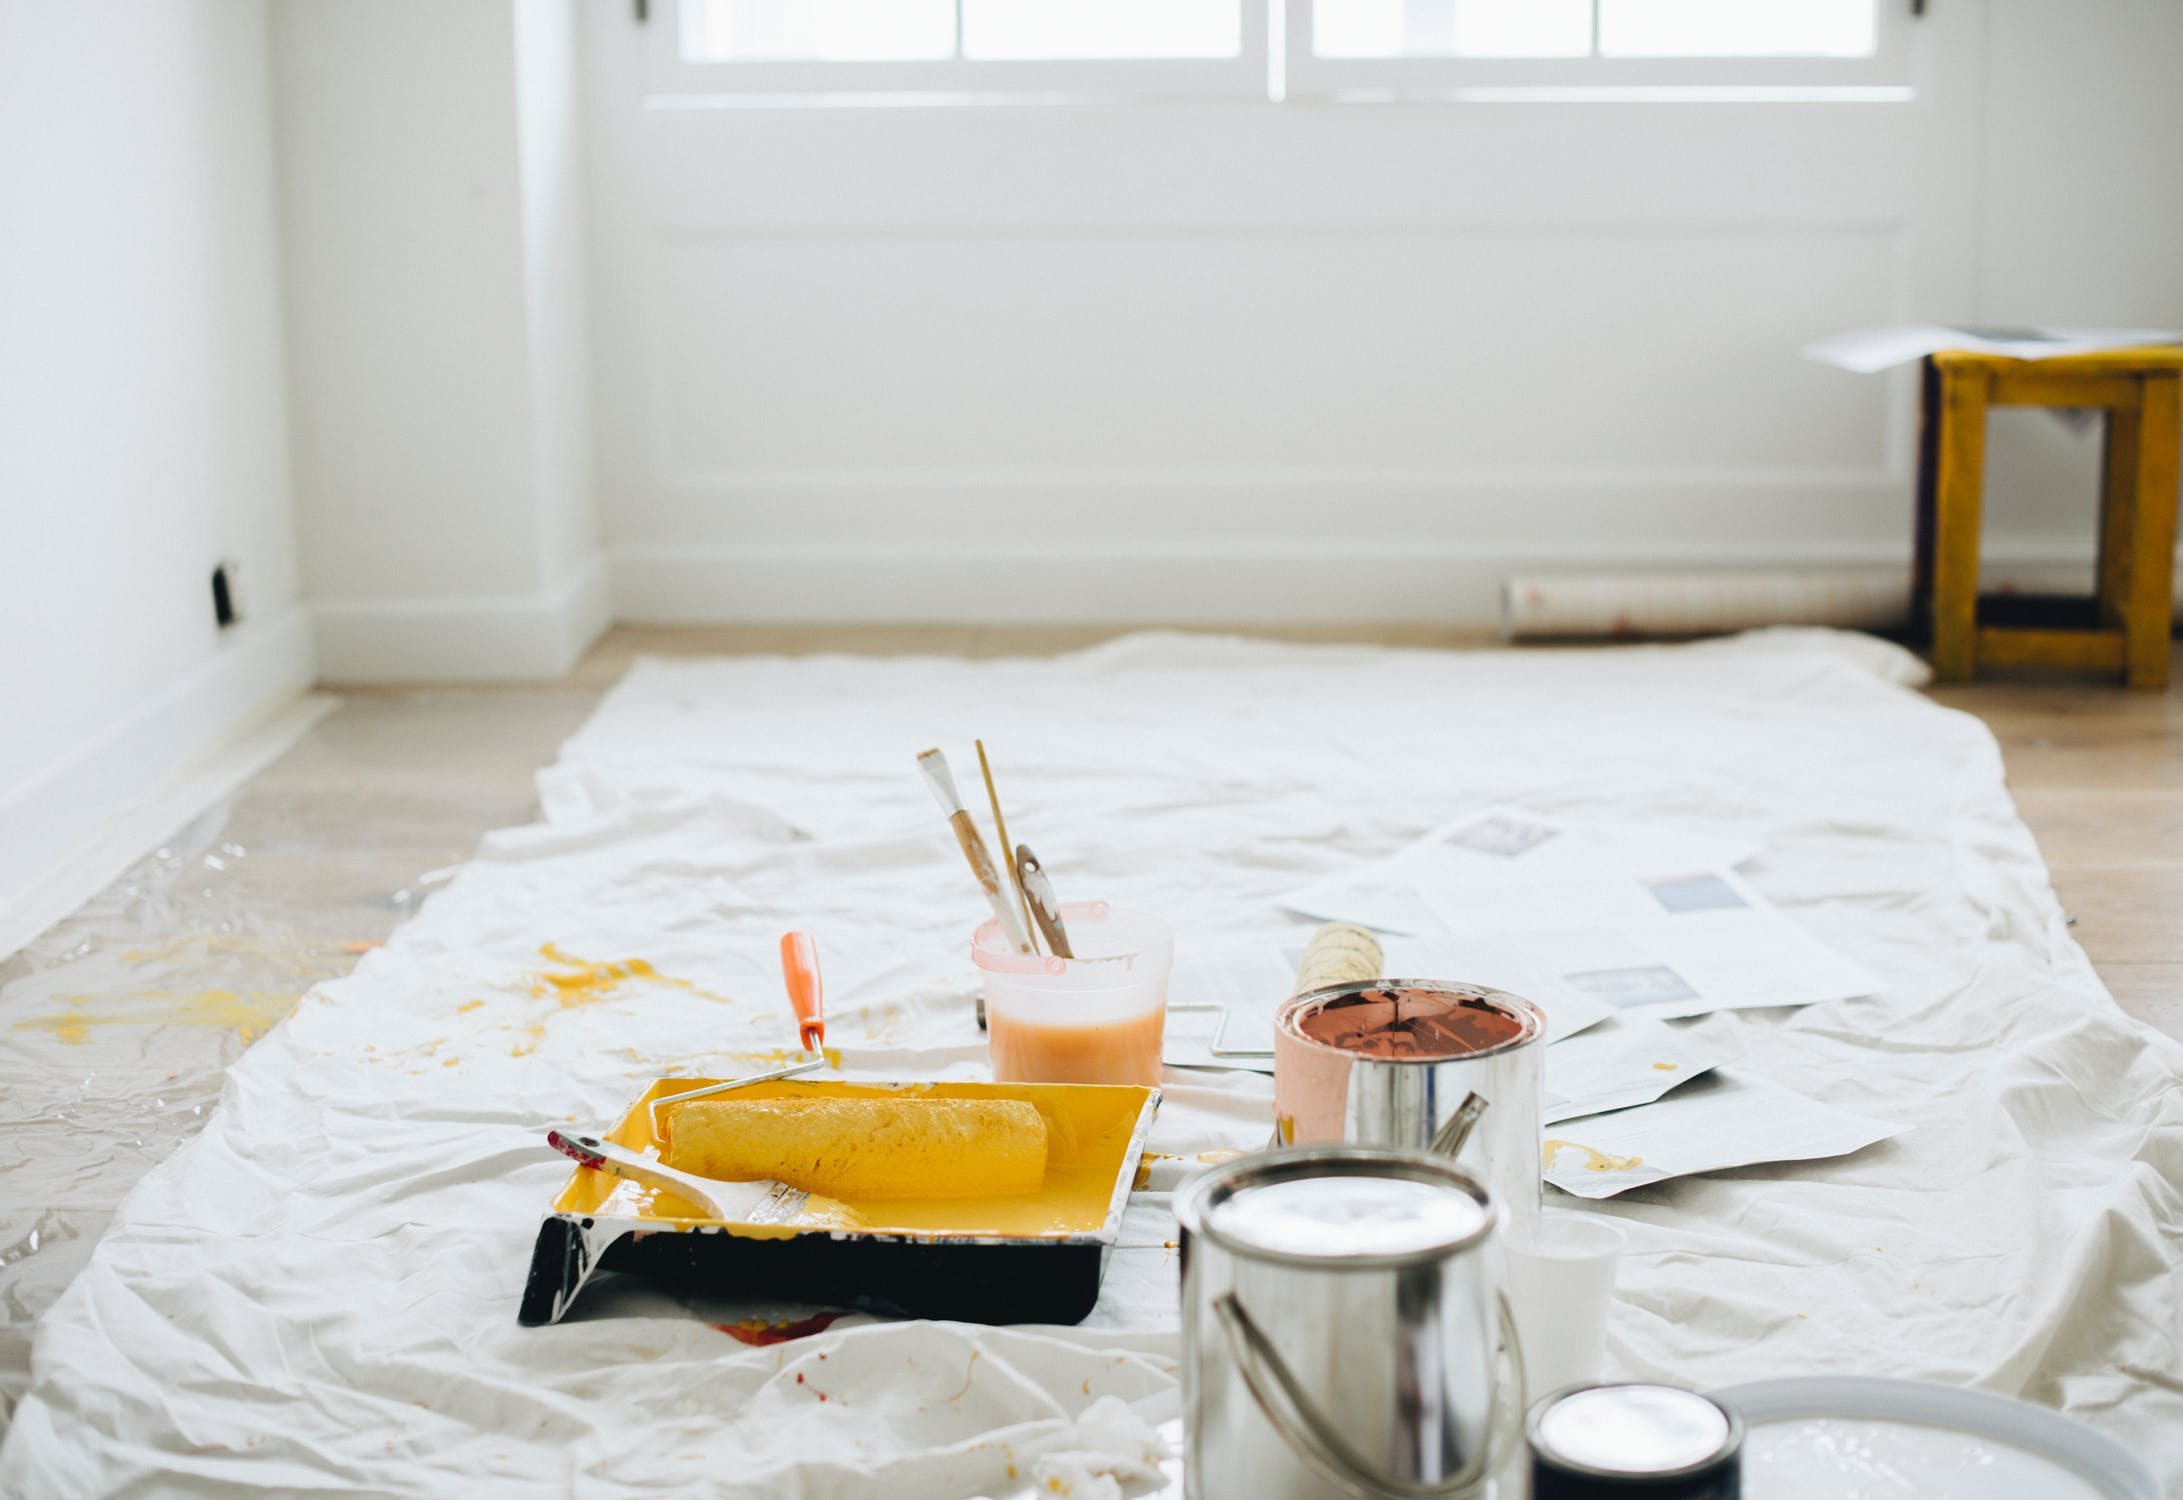 5 Things You Should Know About Using a Paint Sprayer